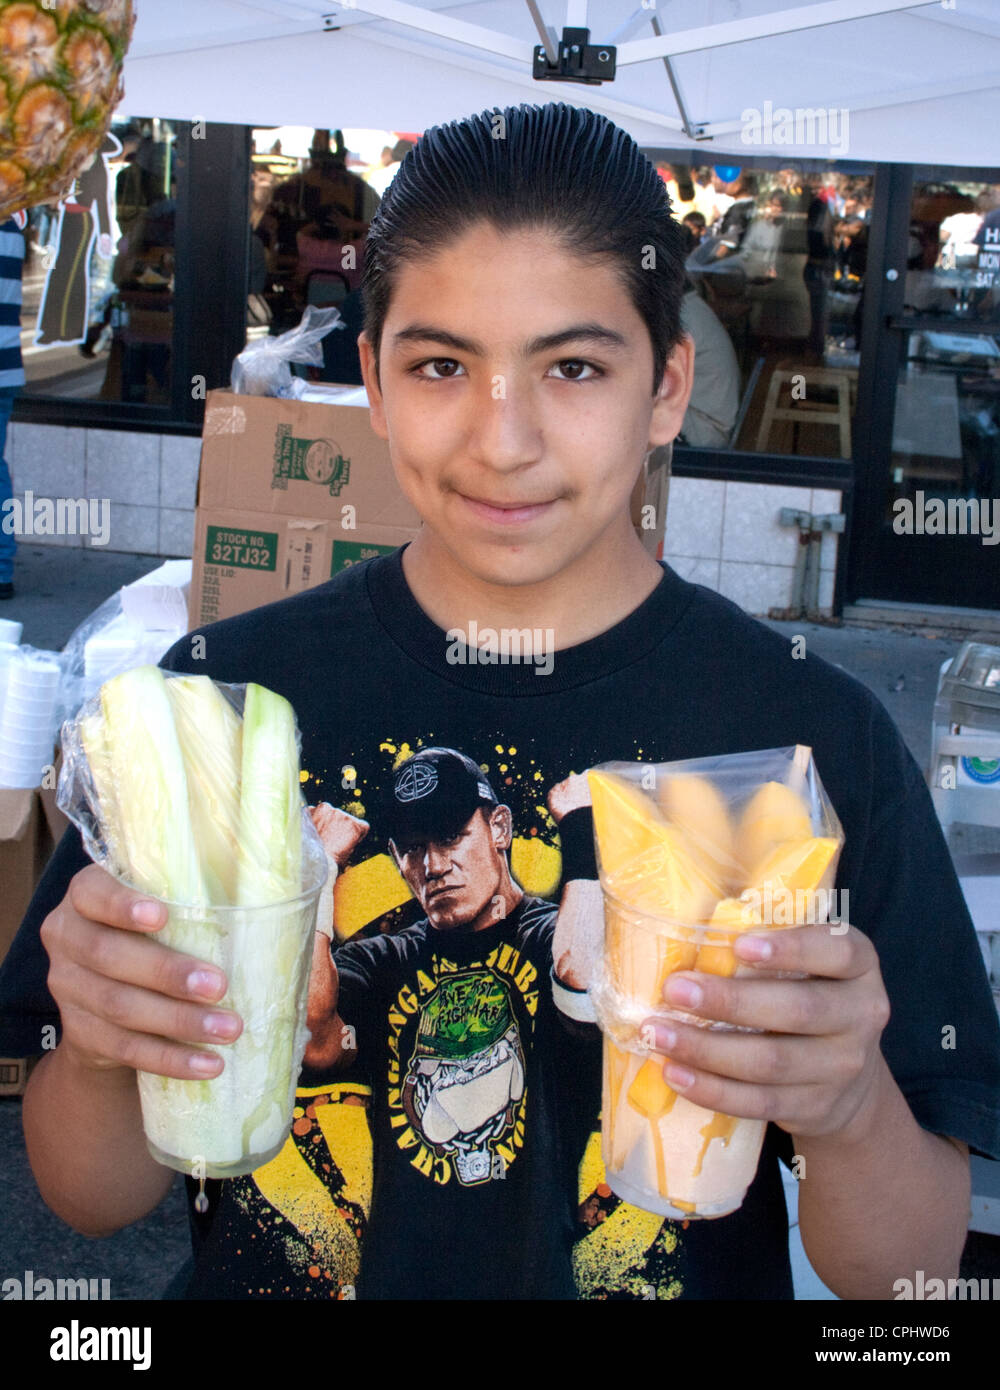 Happy Mexican American teen boy holding cups of fruit at sidewalk cafe. Mexican Independence Day Minneapolis Minnesota MN USA Stock Photo